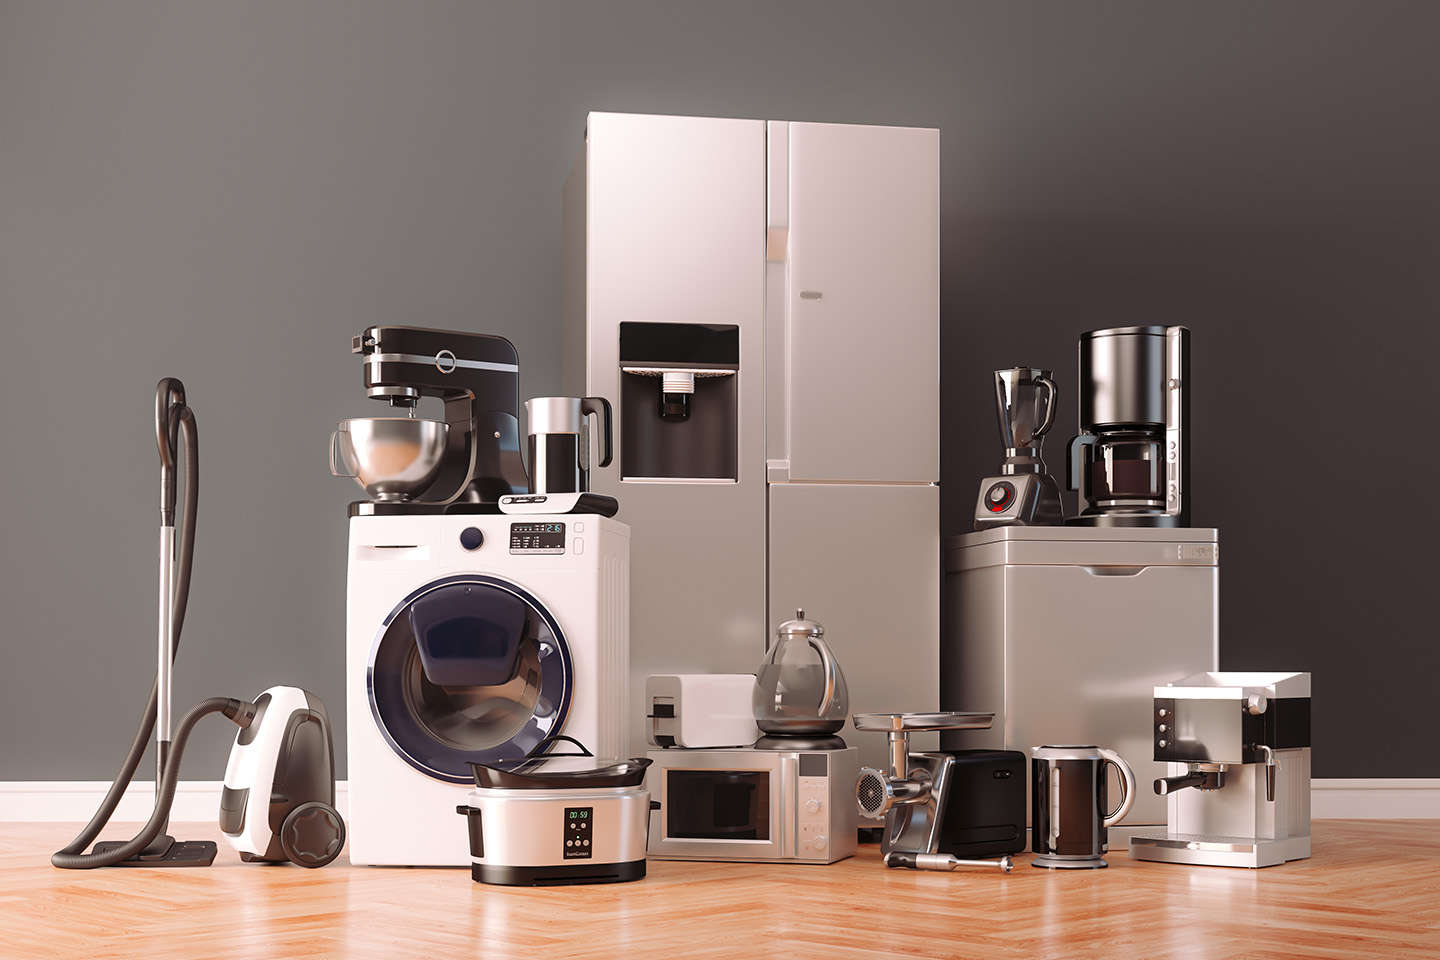 A variety of modern smart home appliances in a modern household, including a refrigerator, oven, microwave, dishwasher, washing machine, dryer, vacuum cleaner, coffee maker, and toaster.